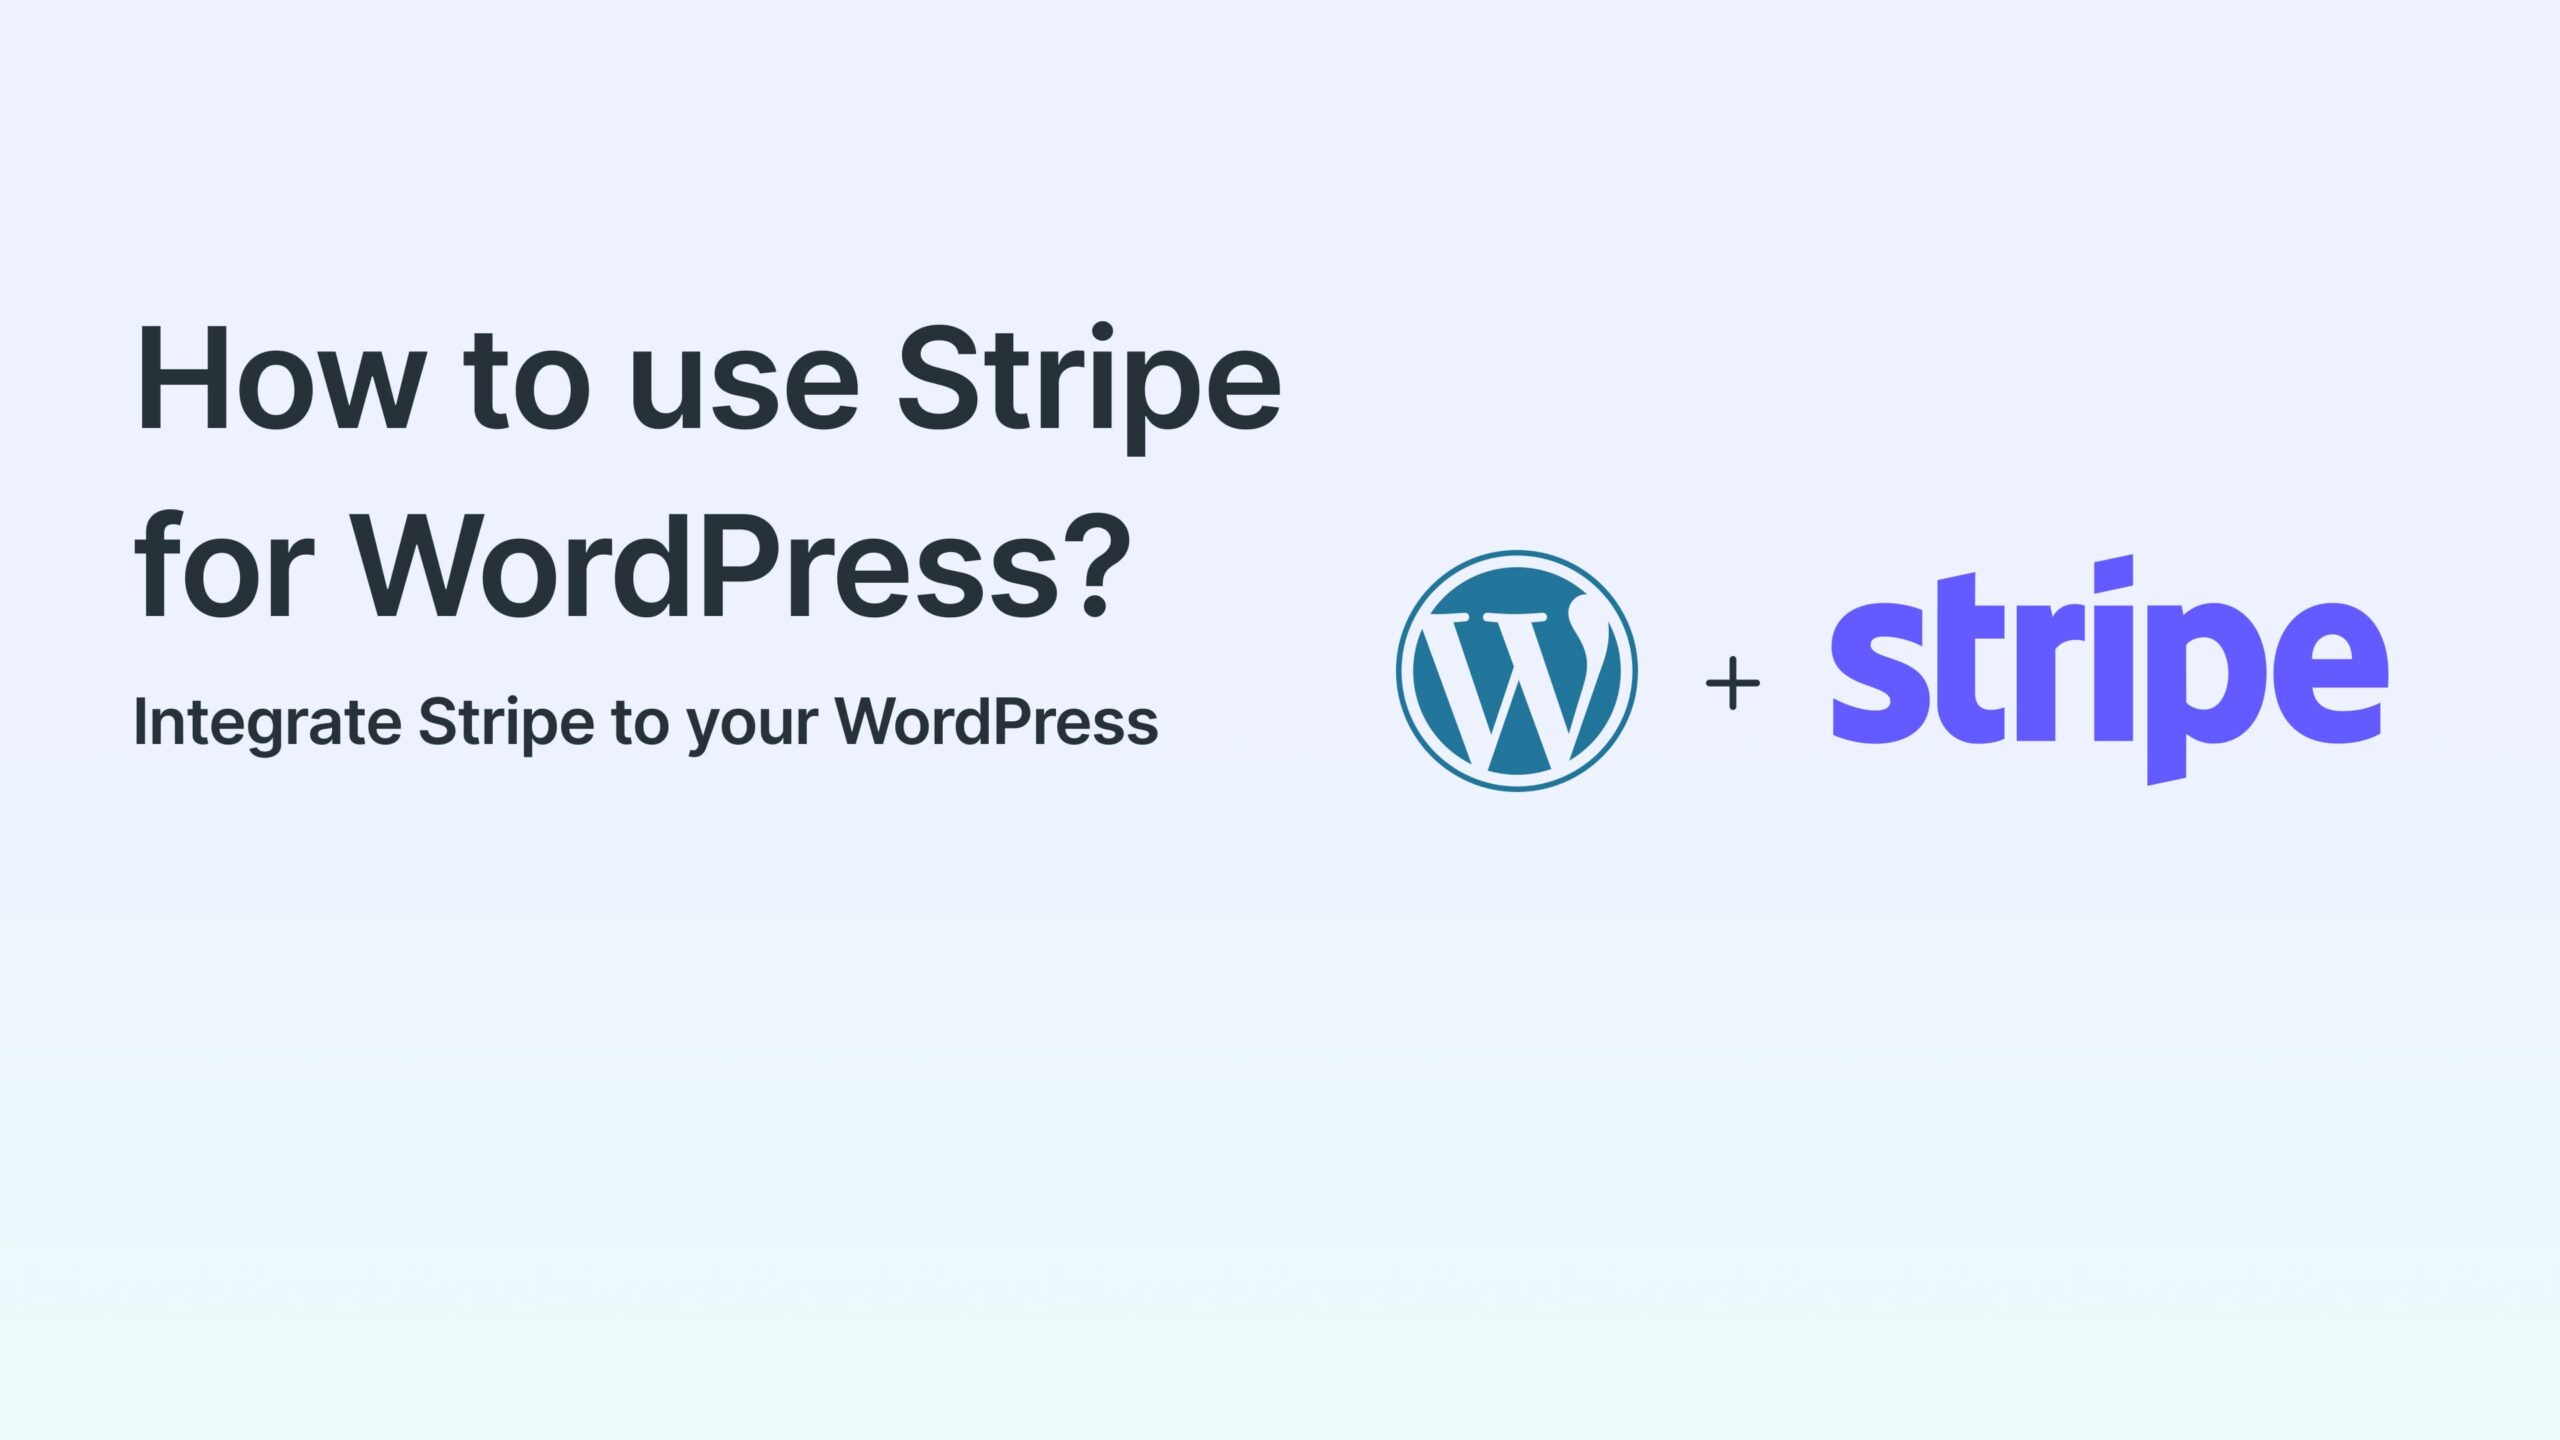 How to Integrate Stripe with WordPress? Step-by-step guide